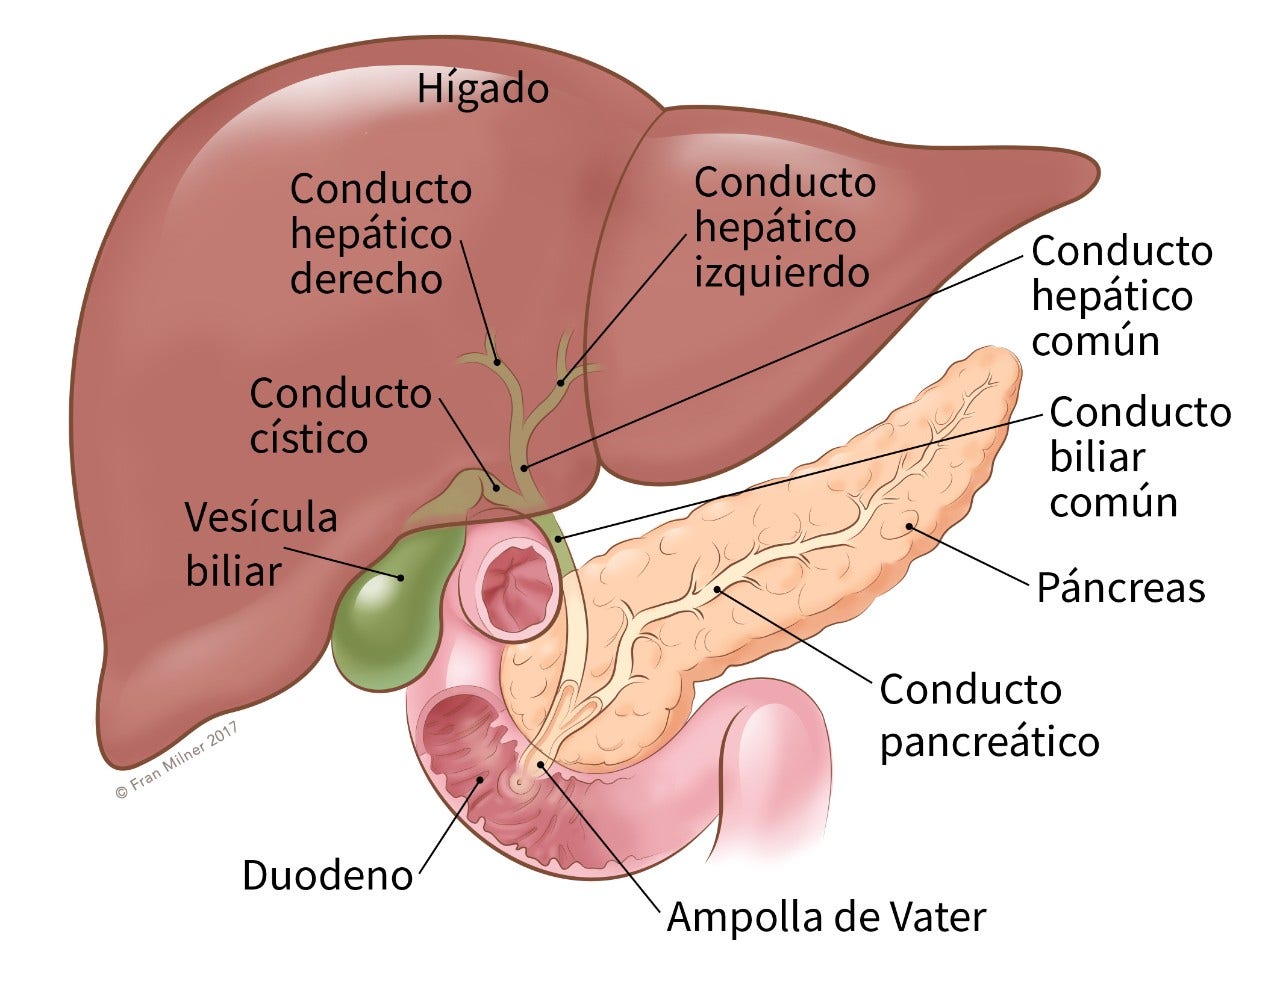 illustration showing the location of the common bile duct, liver, pancreas, pancreatic duct, ampula of vater, duodenum, gallbladder, cystic duct, right hepatic duct, left hepatic duct and common hepatic duct